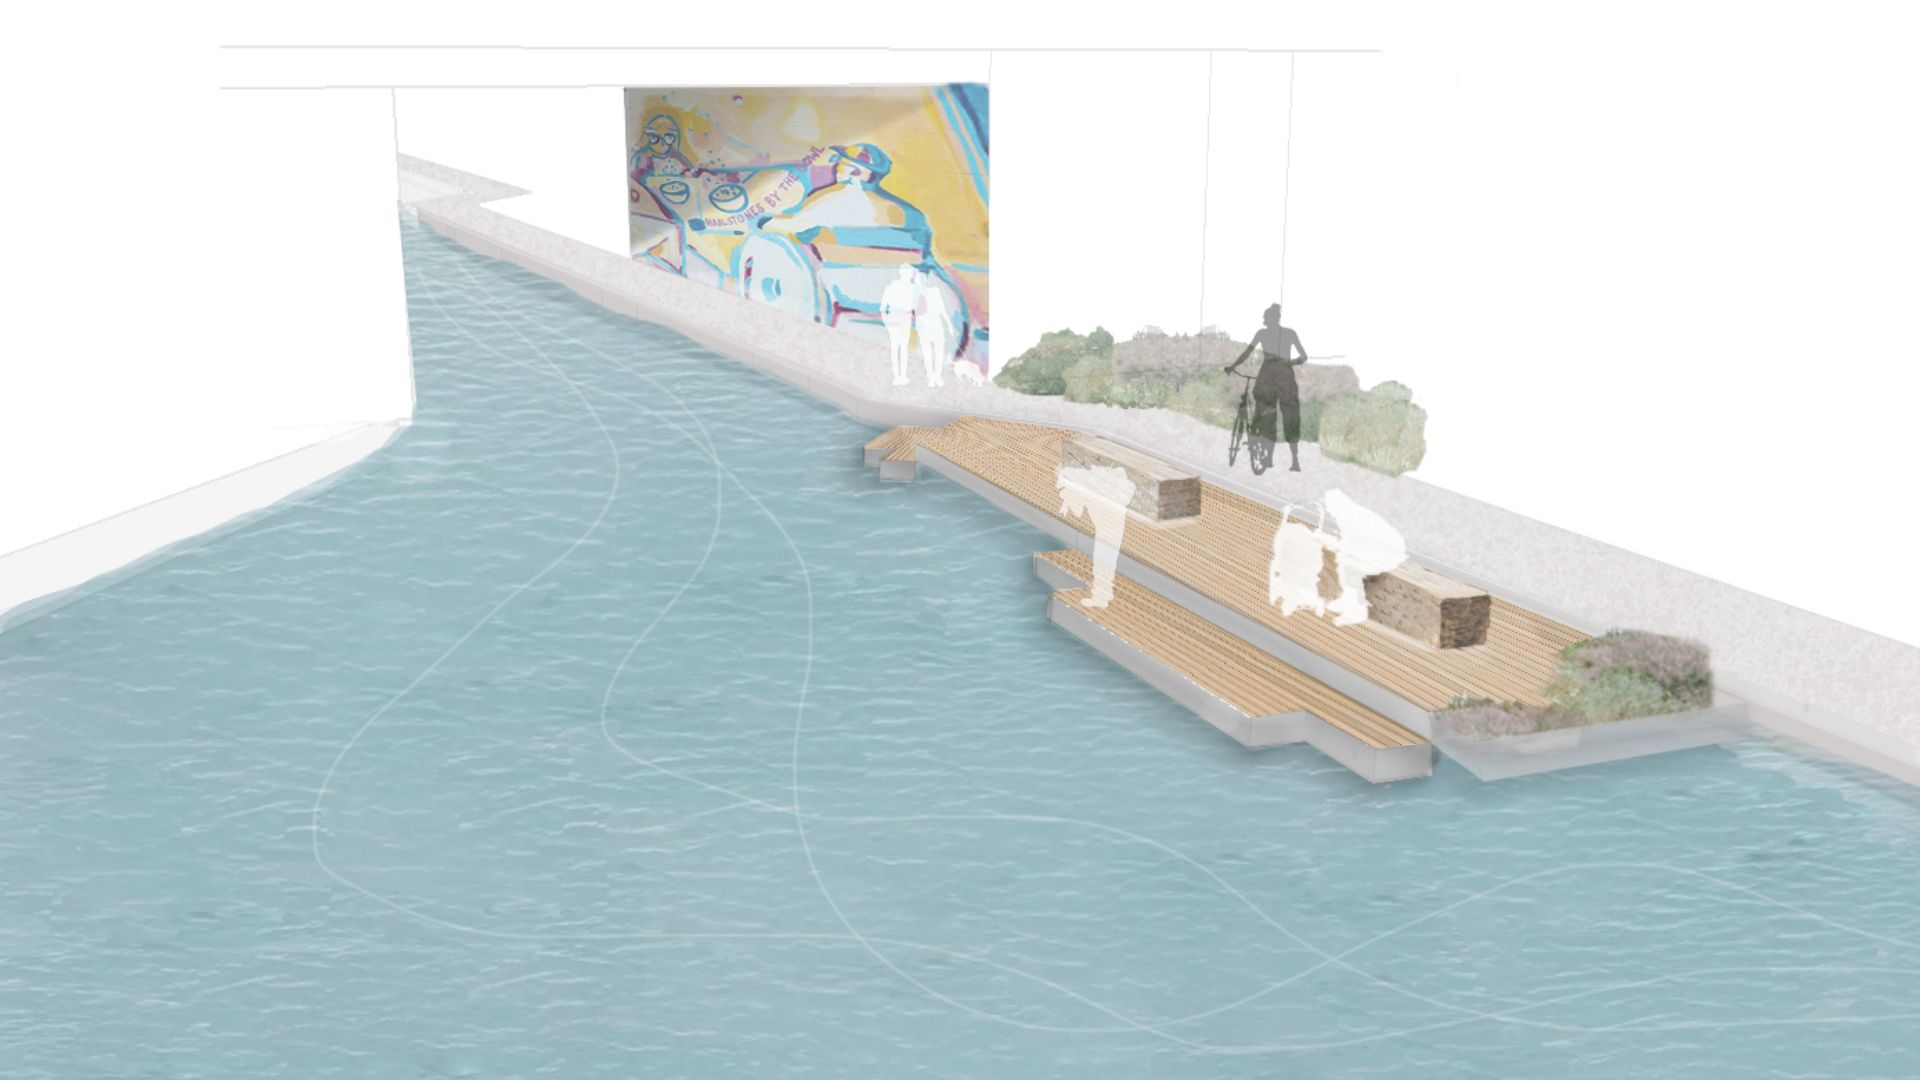 photo-montage visualisation of a floating decking platform over a canal, adjacent to a colourful underbridge mural